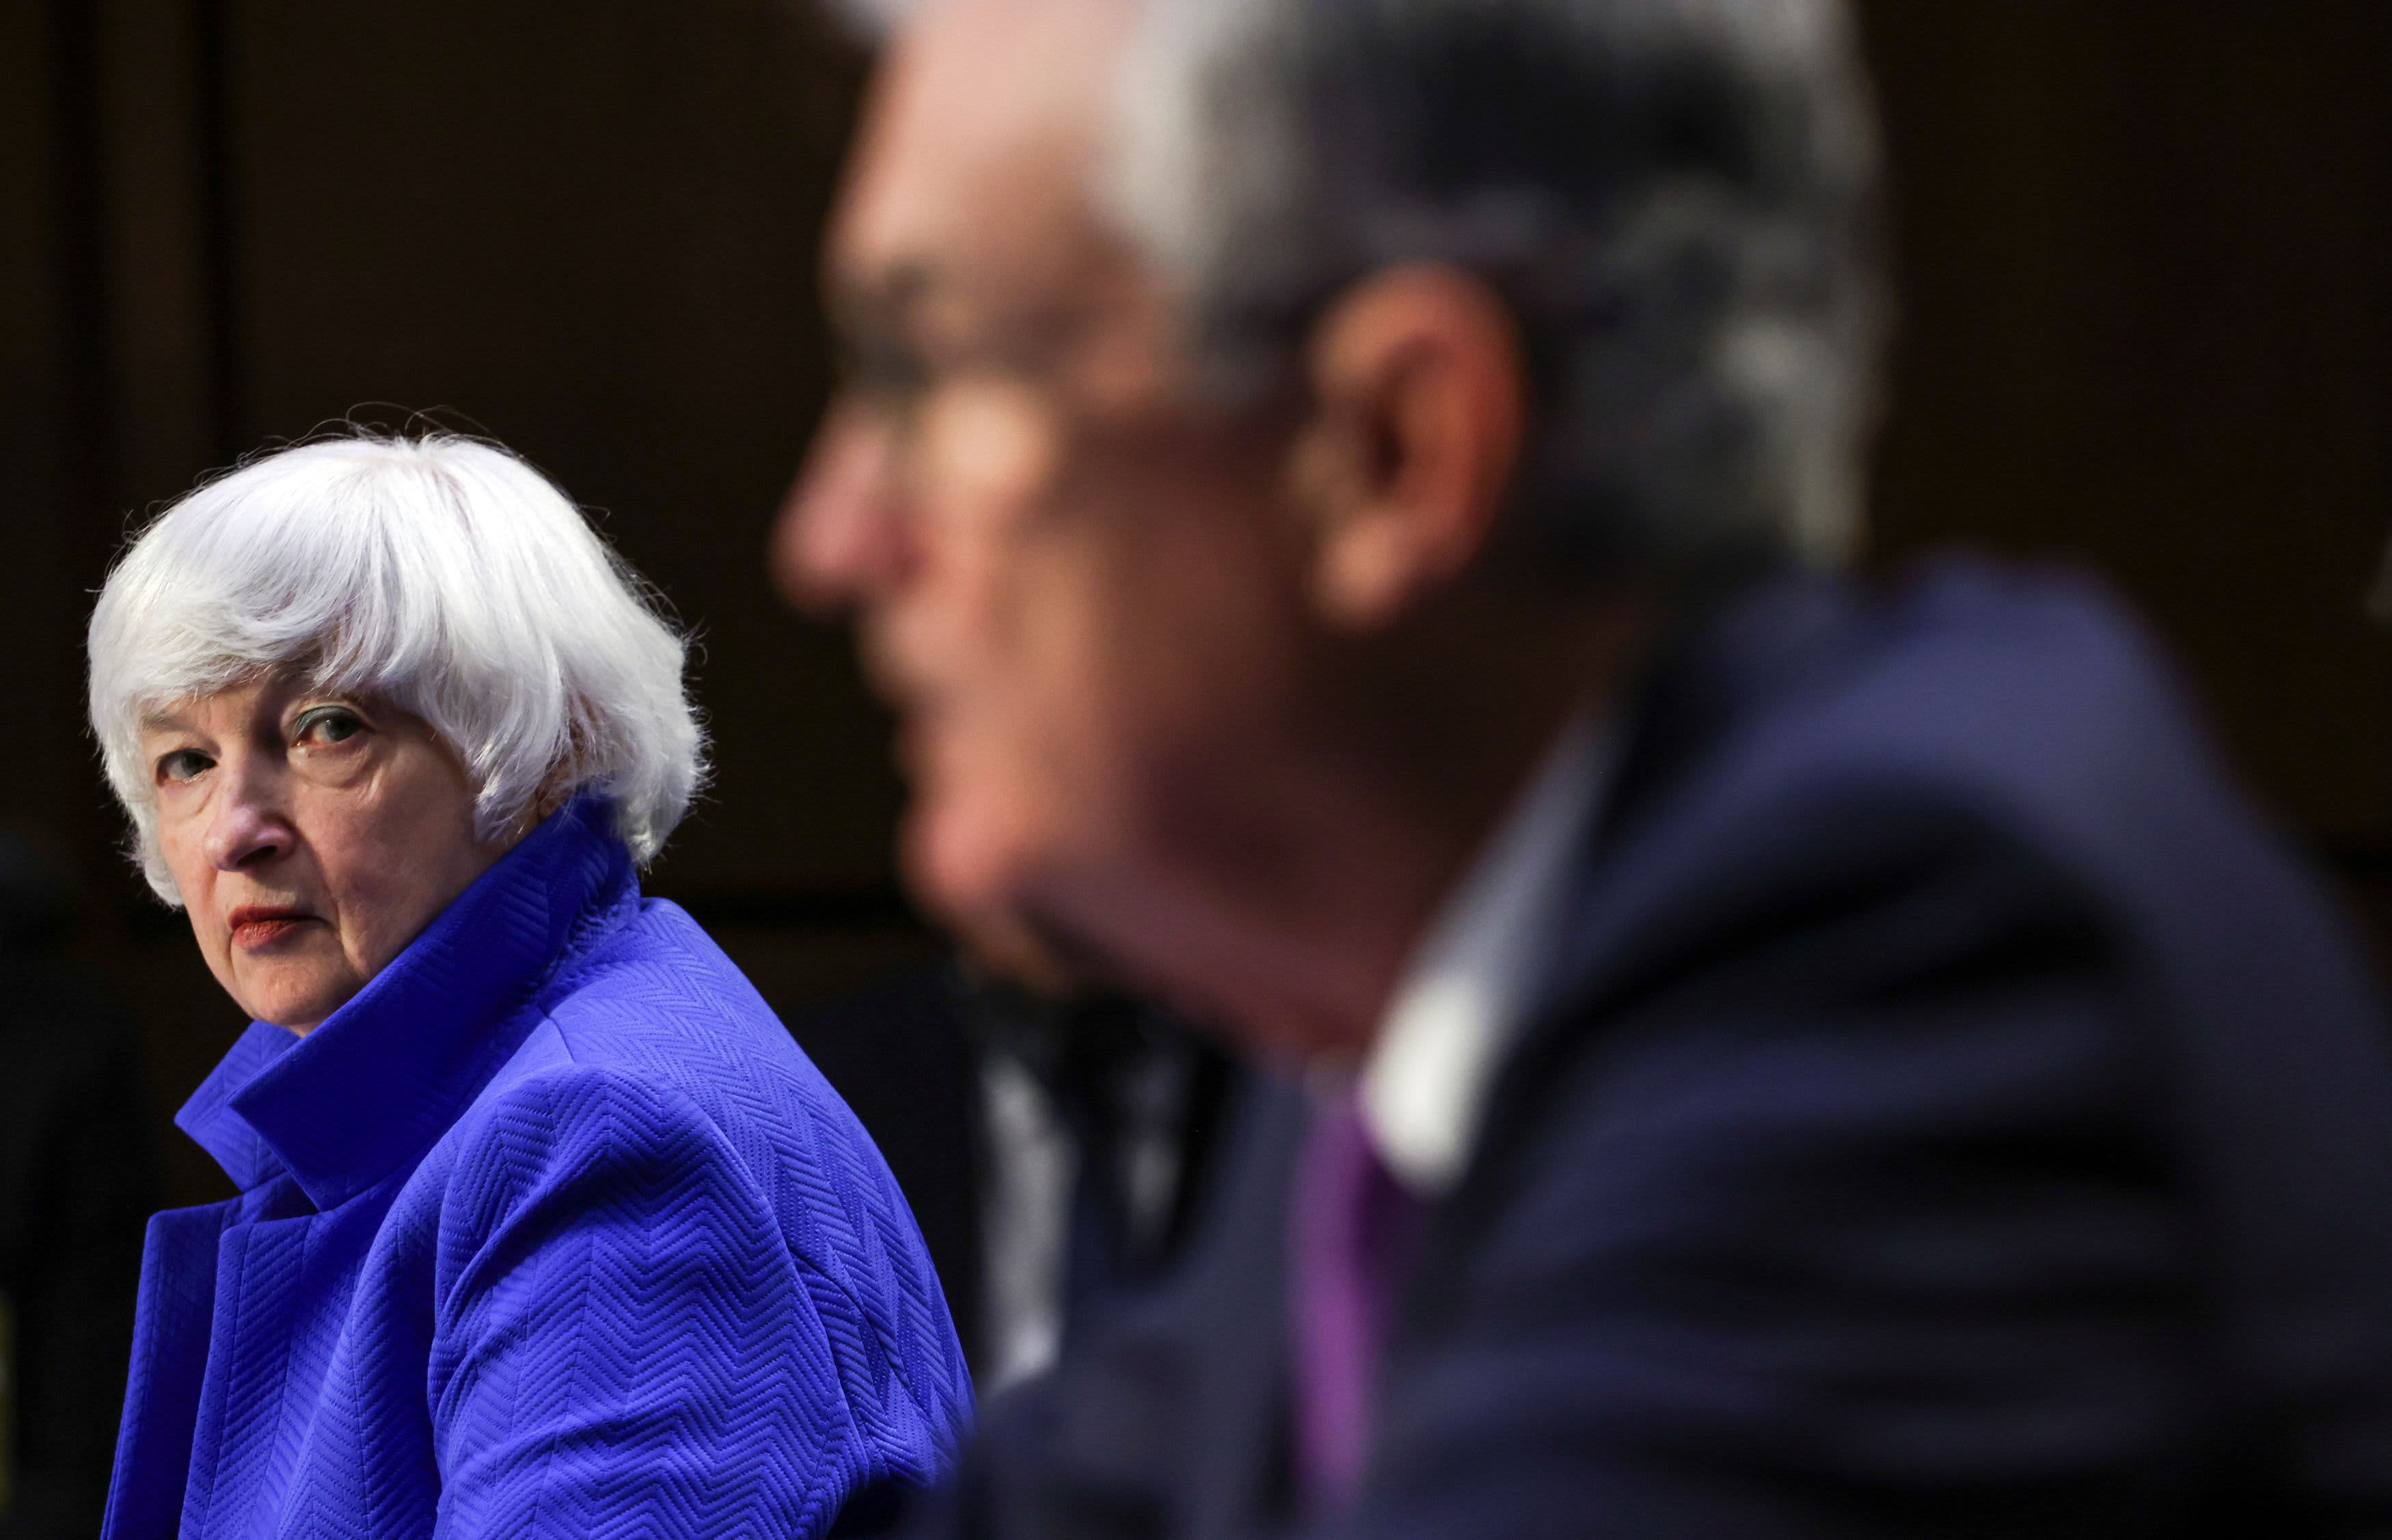 Watch Yellen and Powell testify live before Senate Covid panel – CNBC